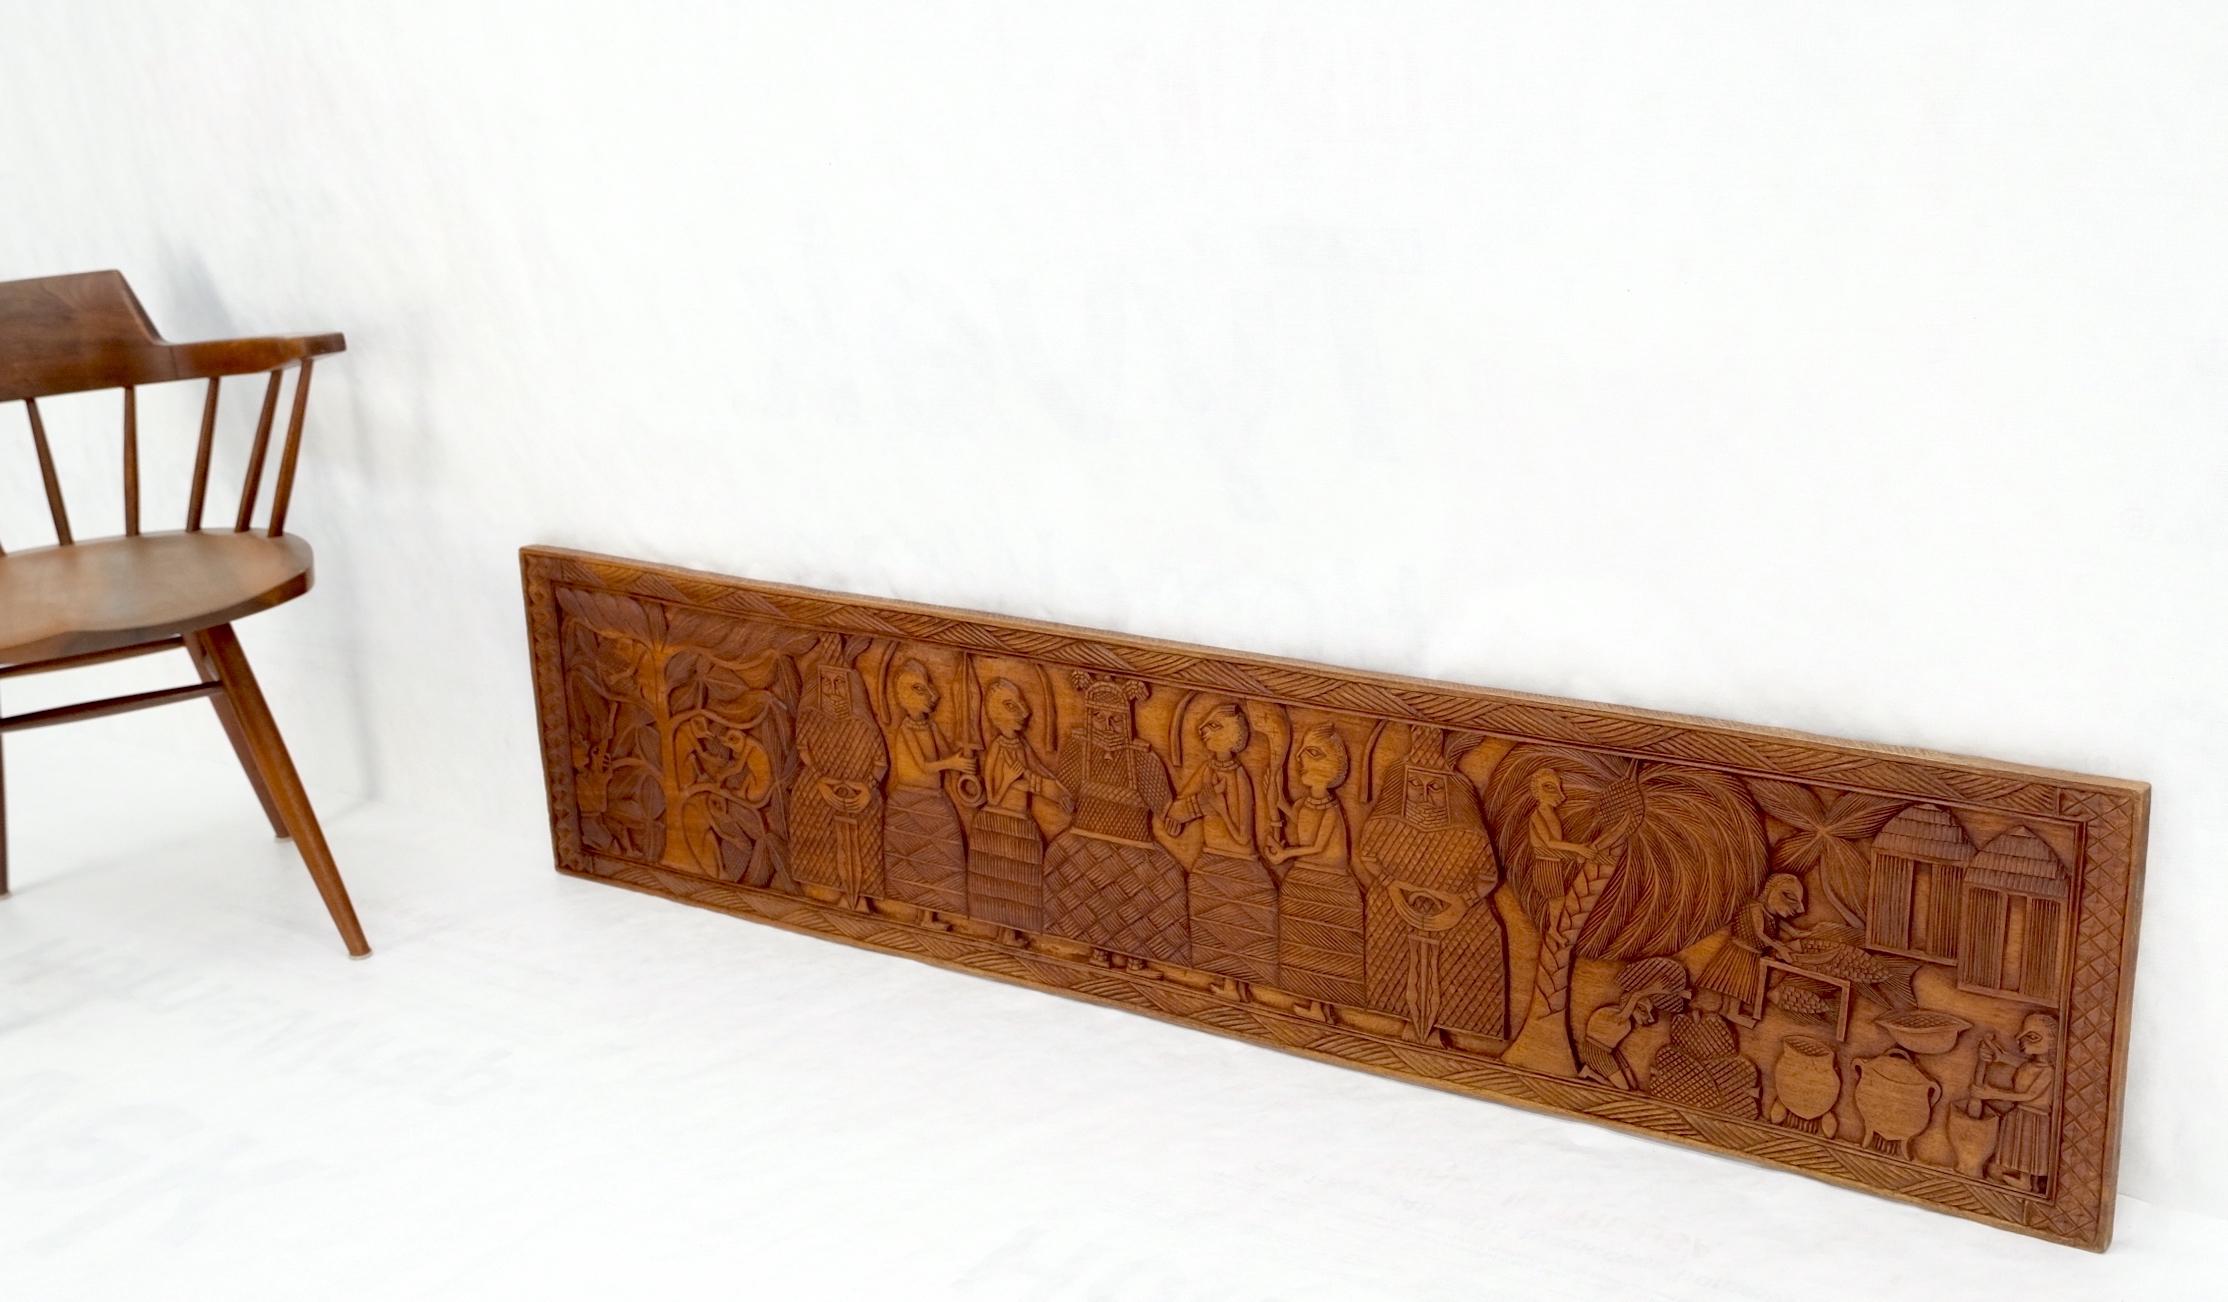 20th Century Carved Solid Teak Long Rectangle Wall Plaque Relief Sculpture Depicting Villager For Sale